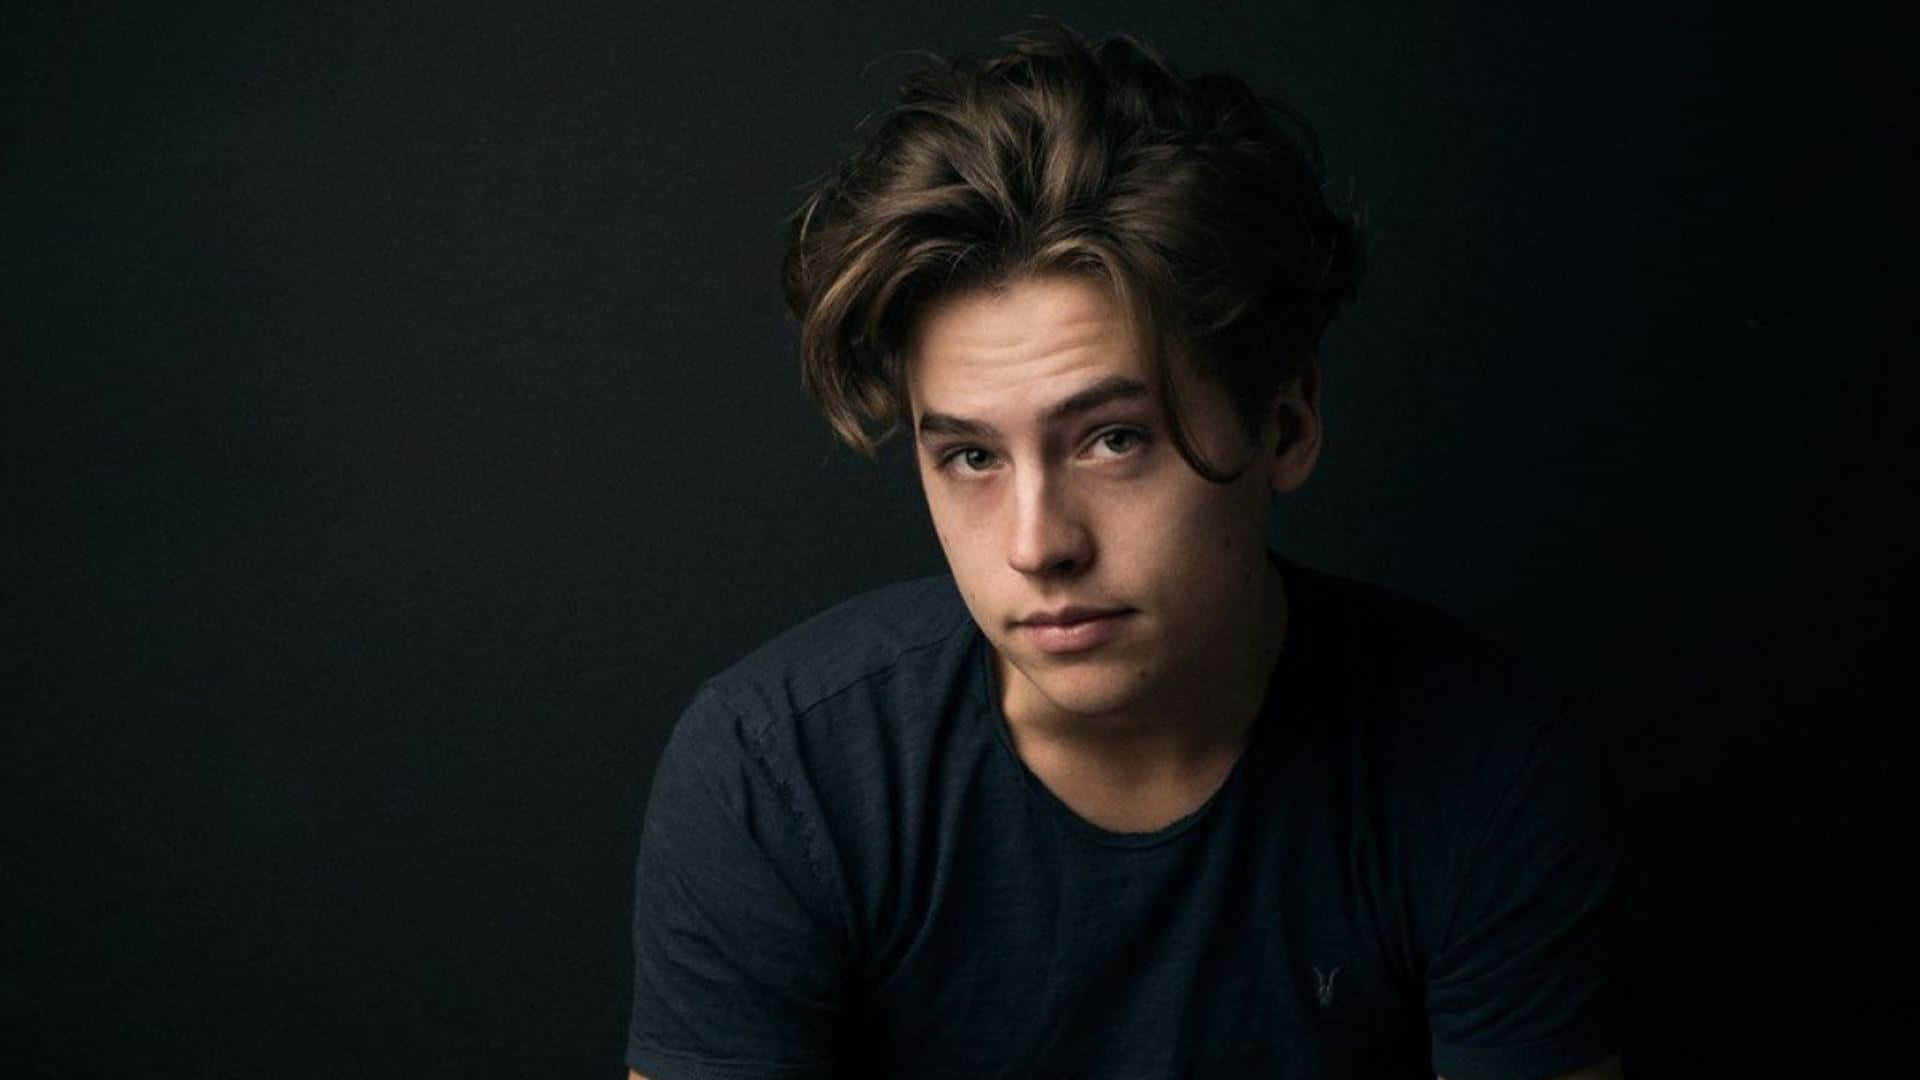 Colesprouse Is An American Actor Known For His Role As Jughead Jones In The Tv Series 